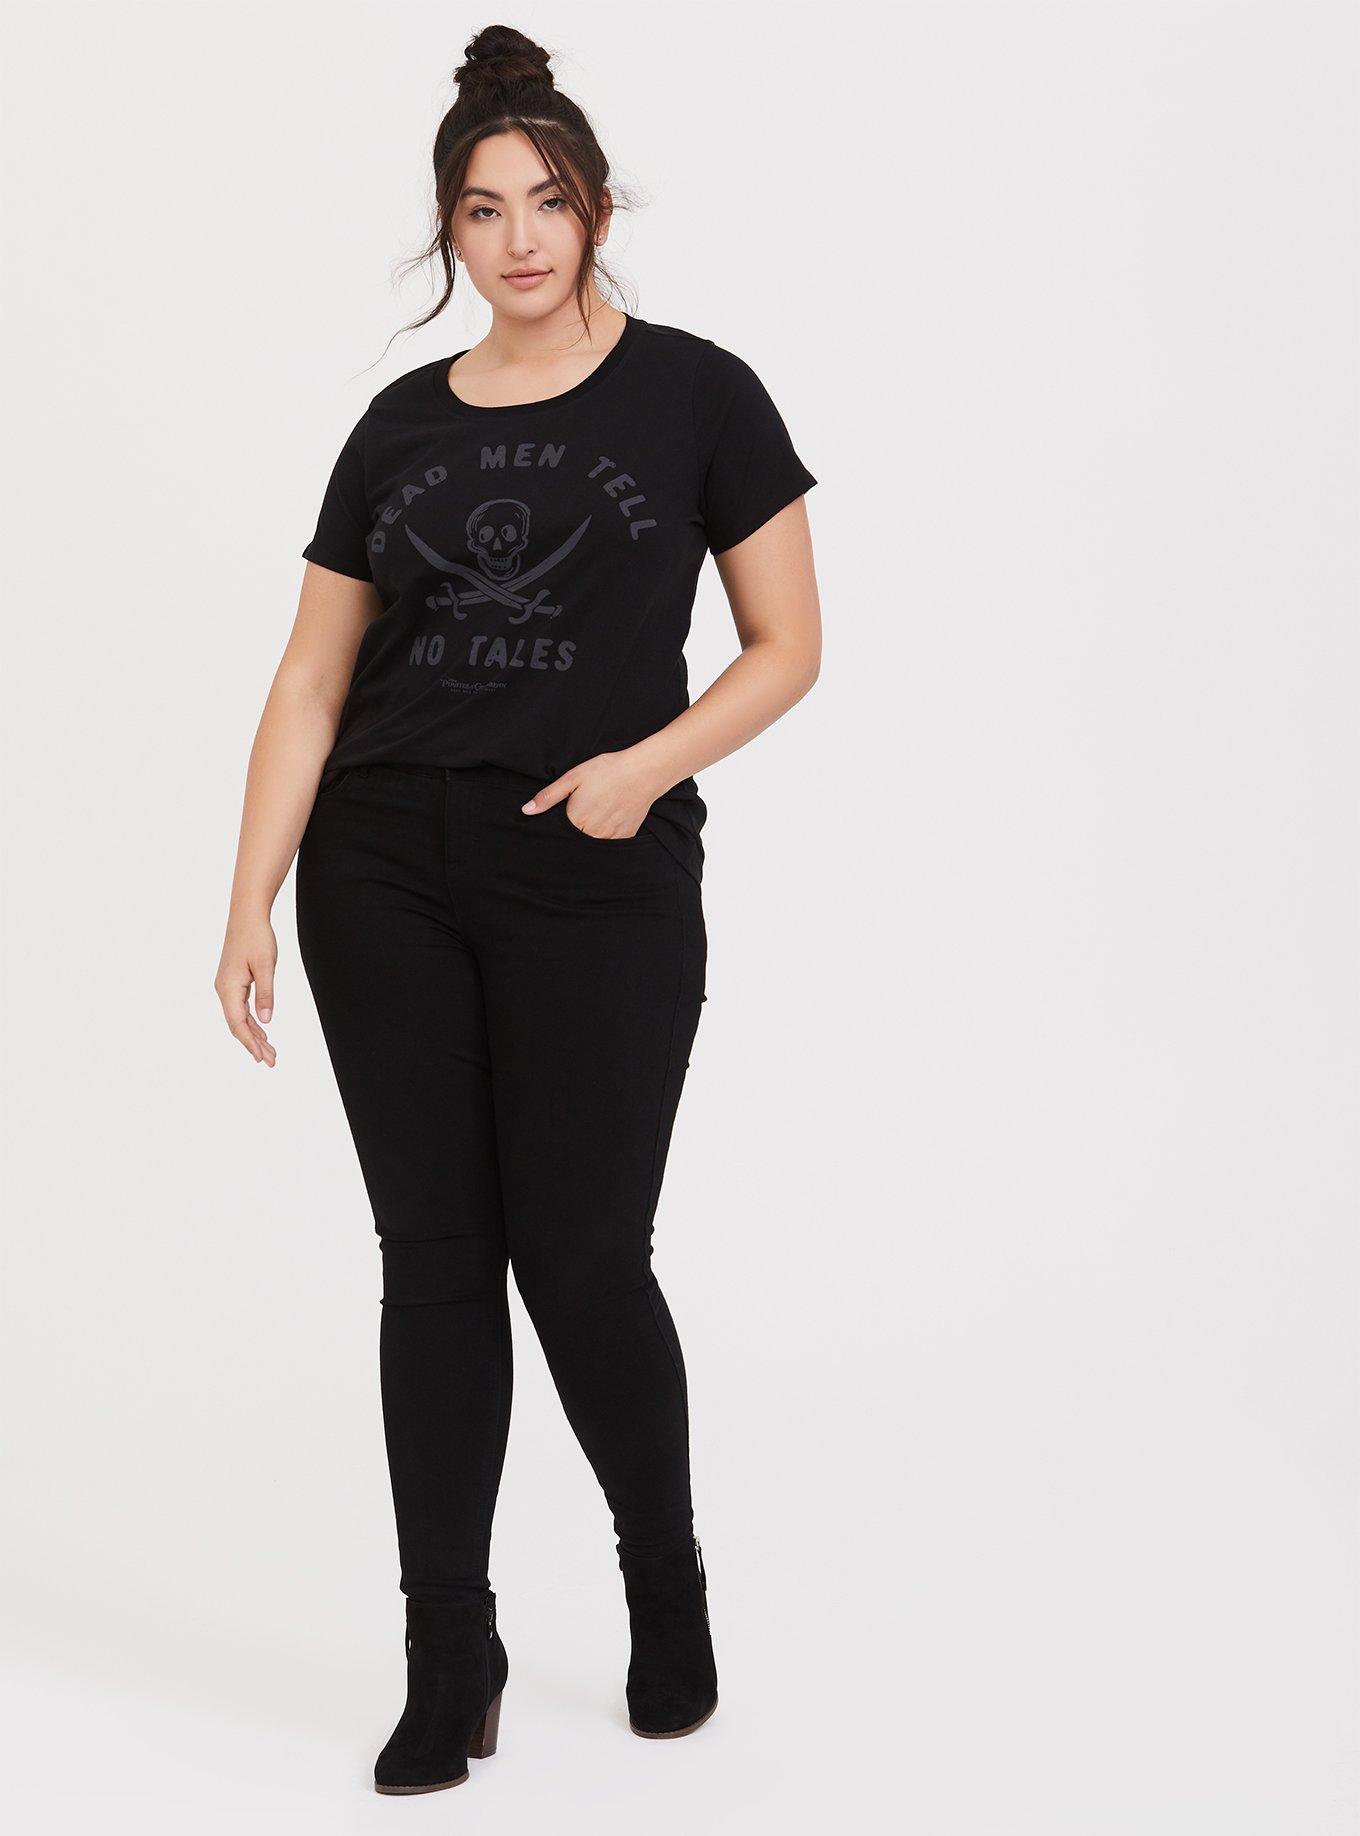 Plus Size - Disney Pirates of the Caribbean Fitted Top - Torrid